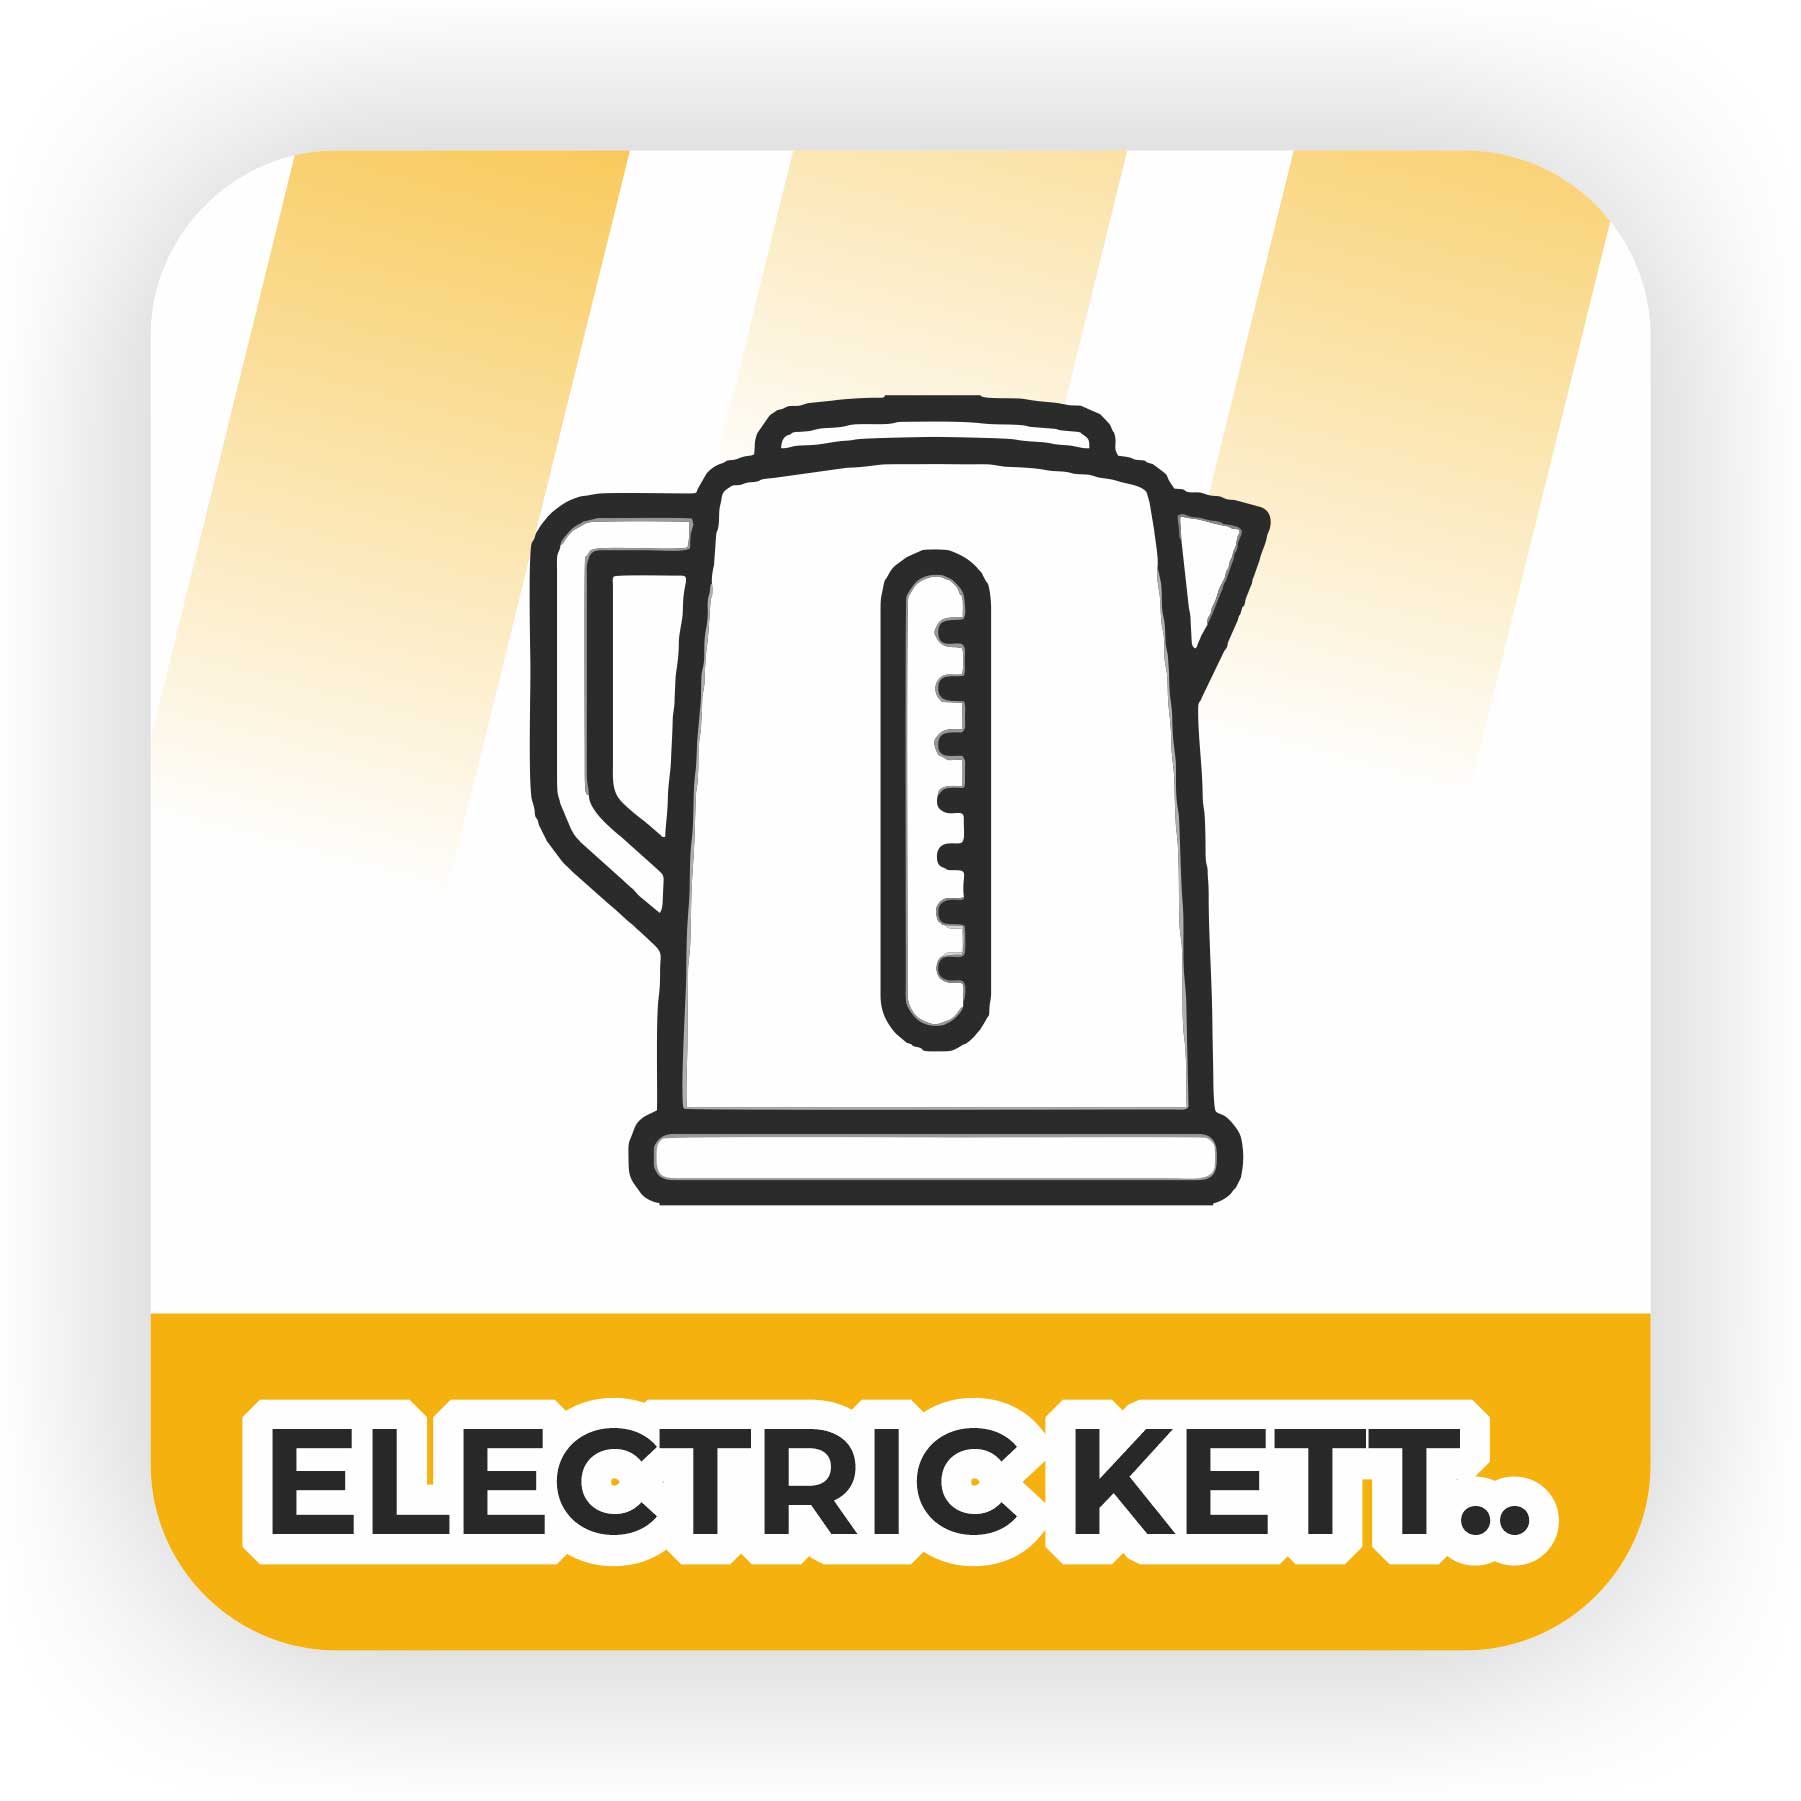 ELECTRIC KETTLES